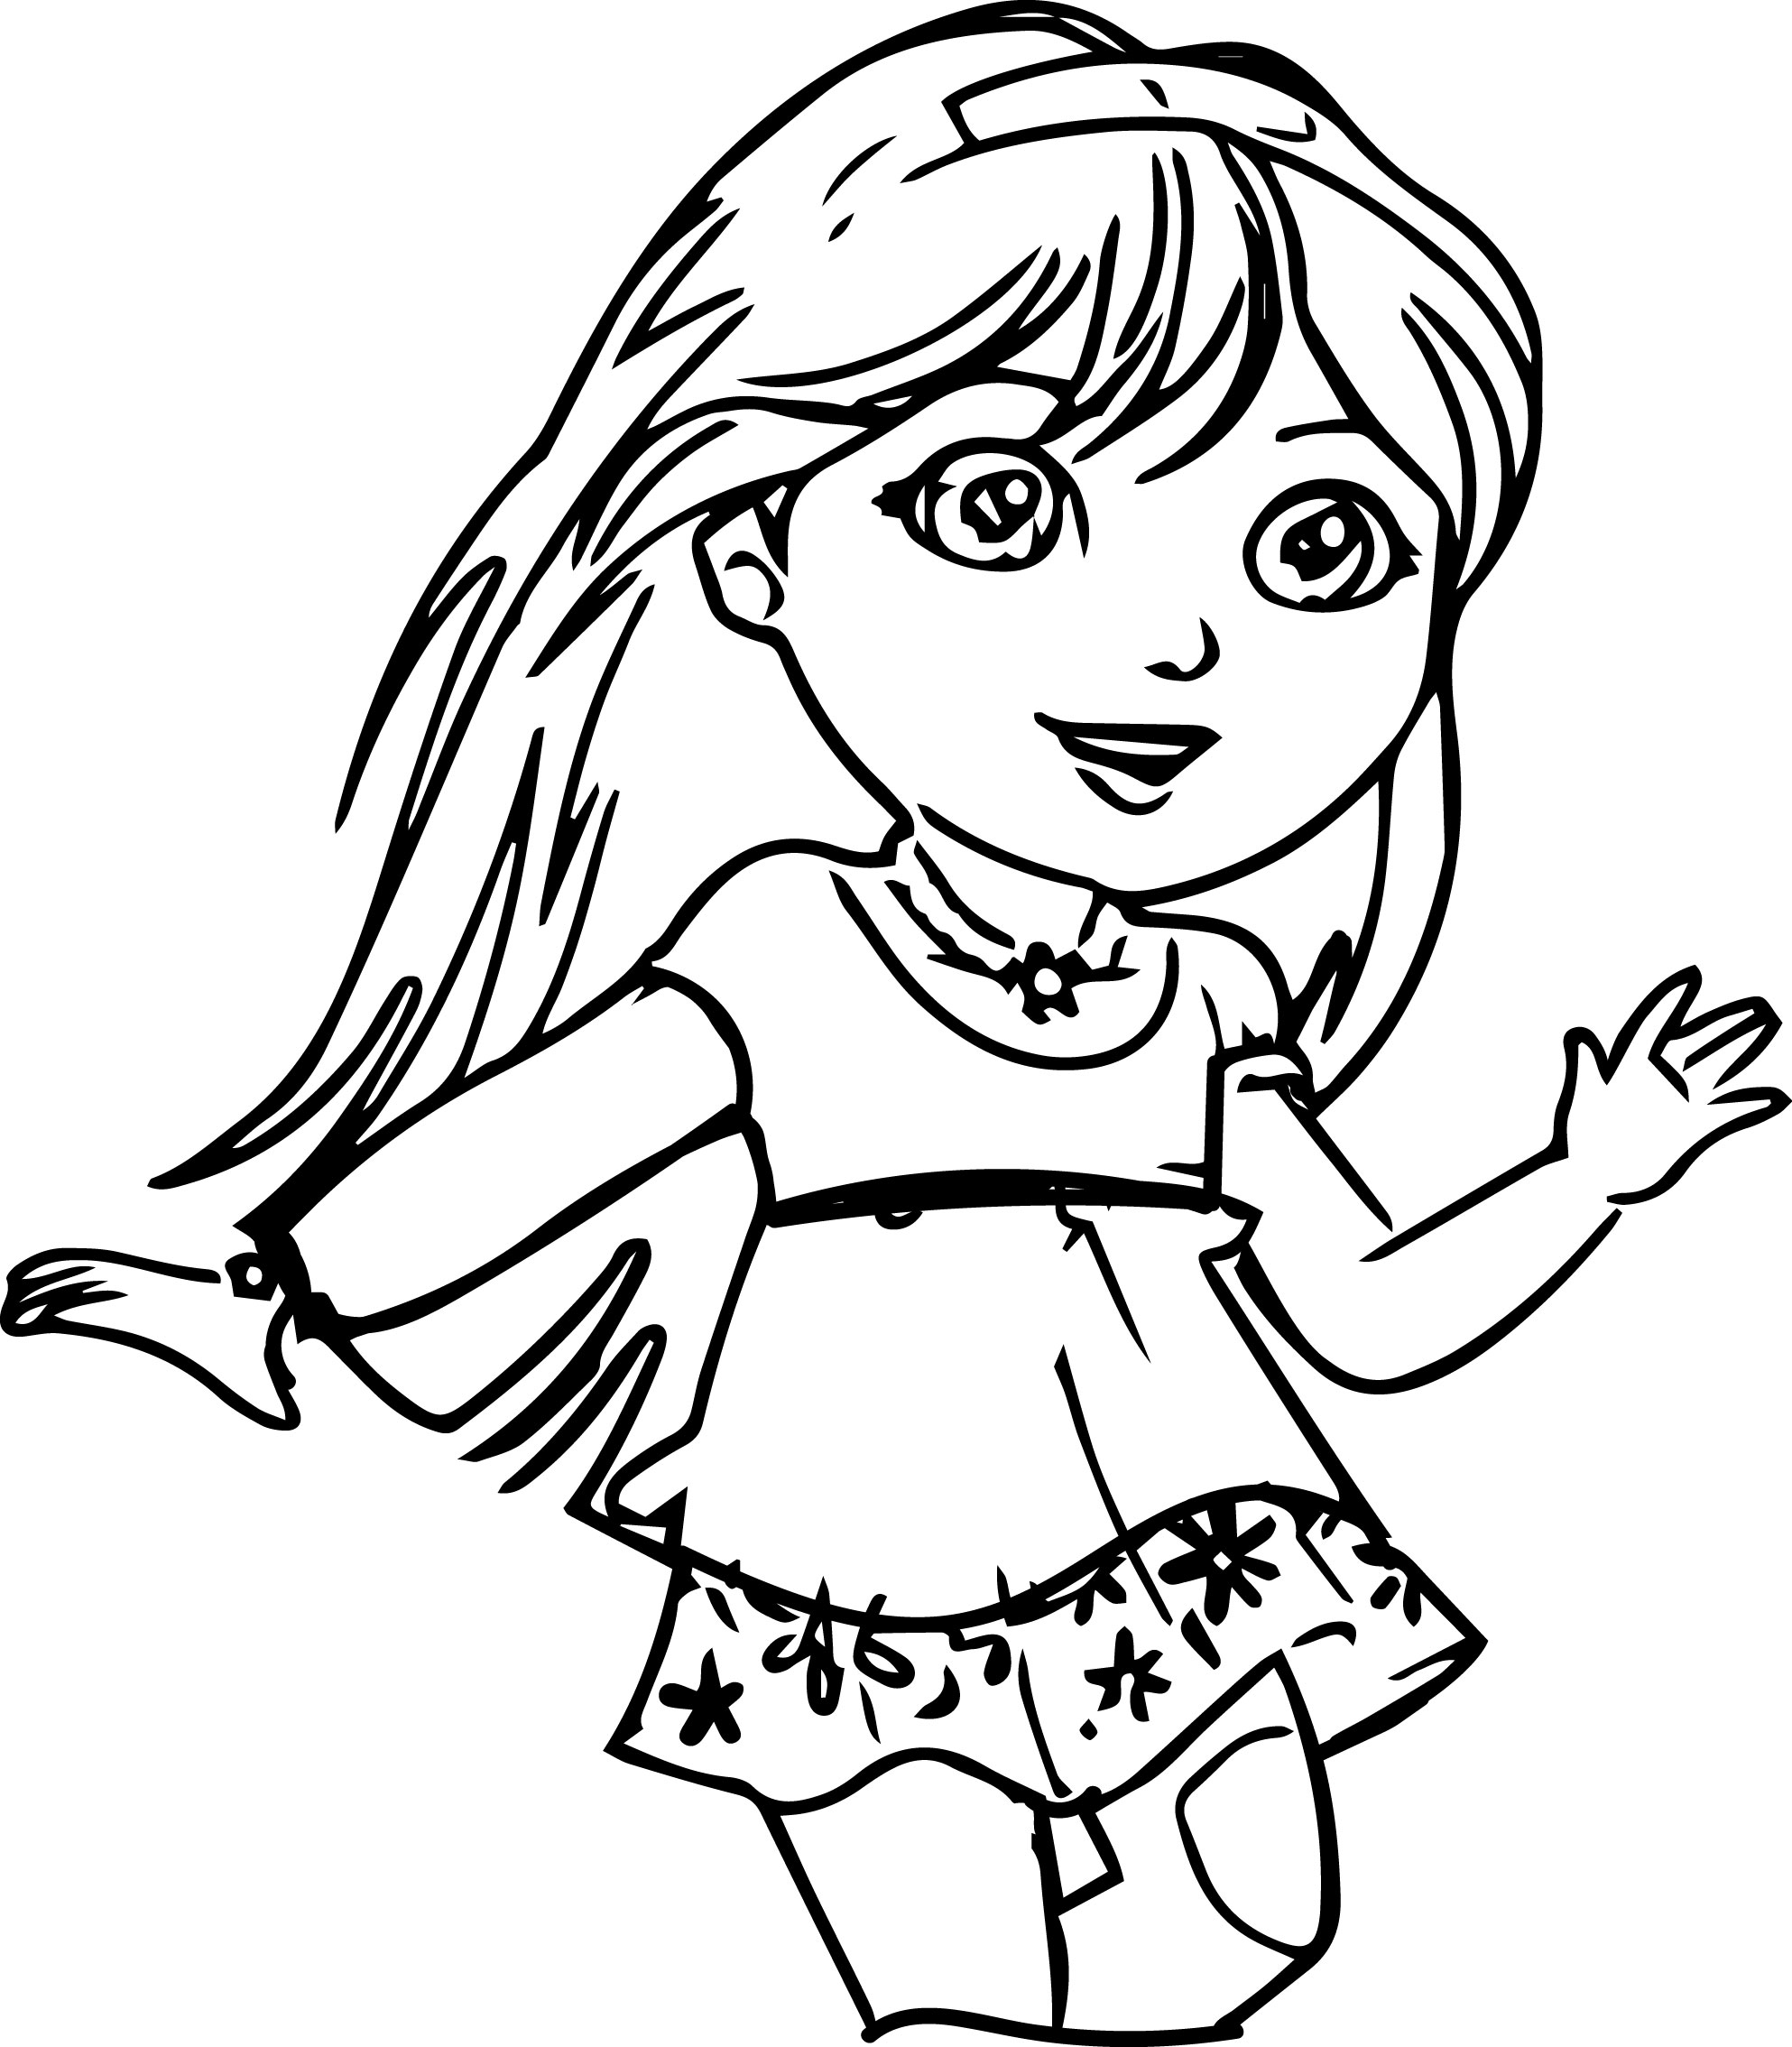 Dora Coloring Pages At GetDrawings.com   Free For Personal ...